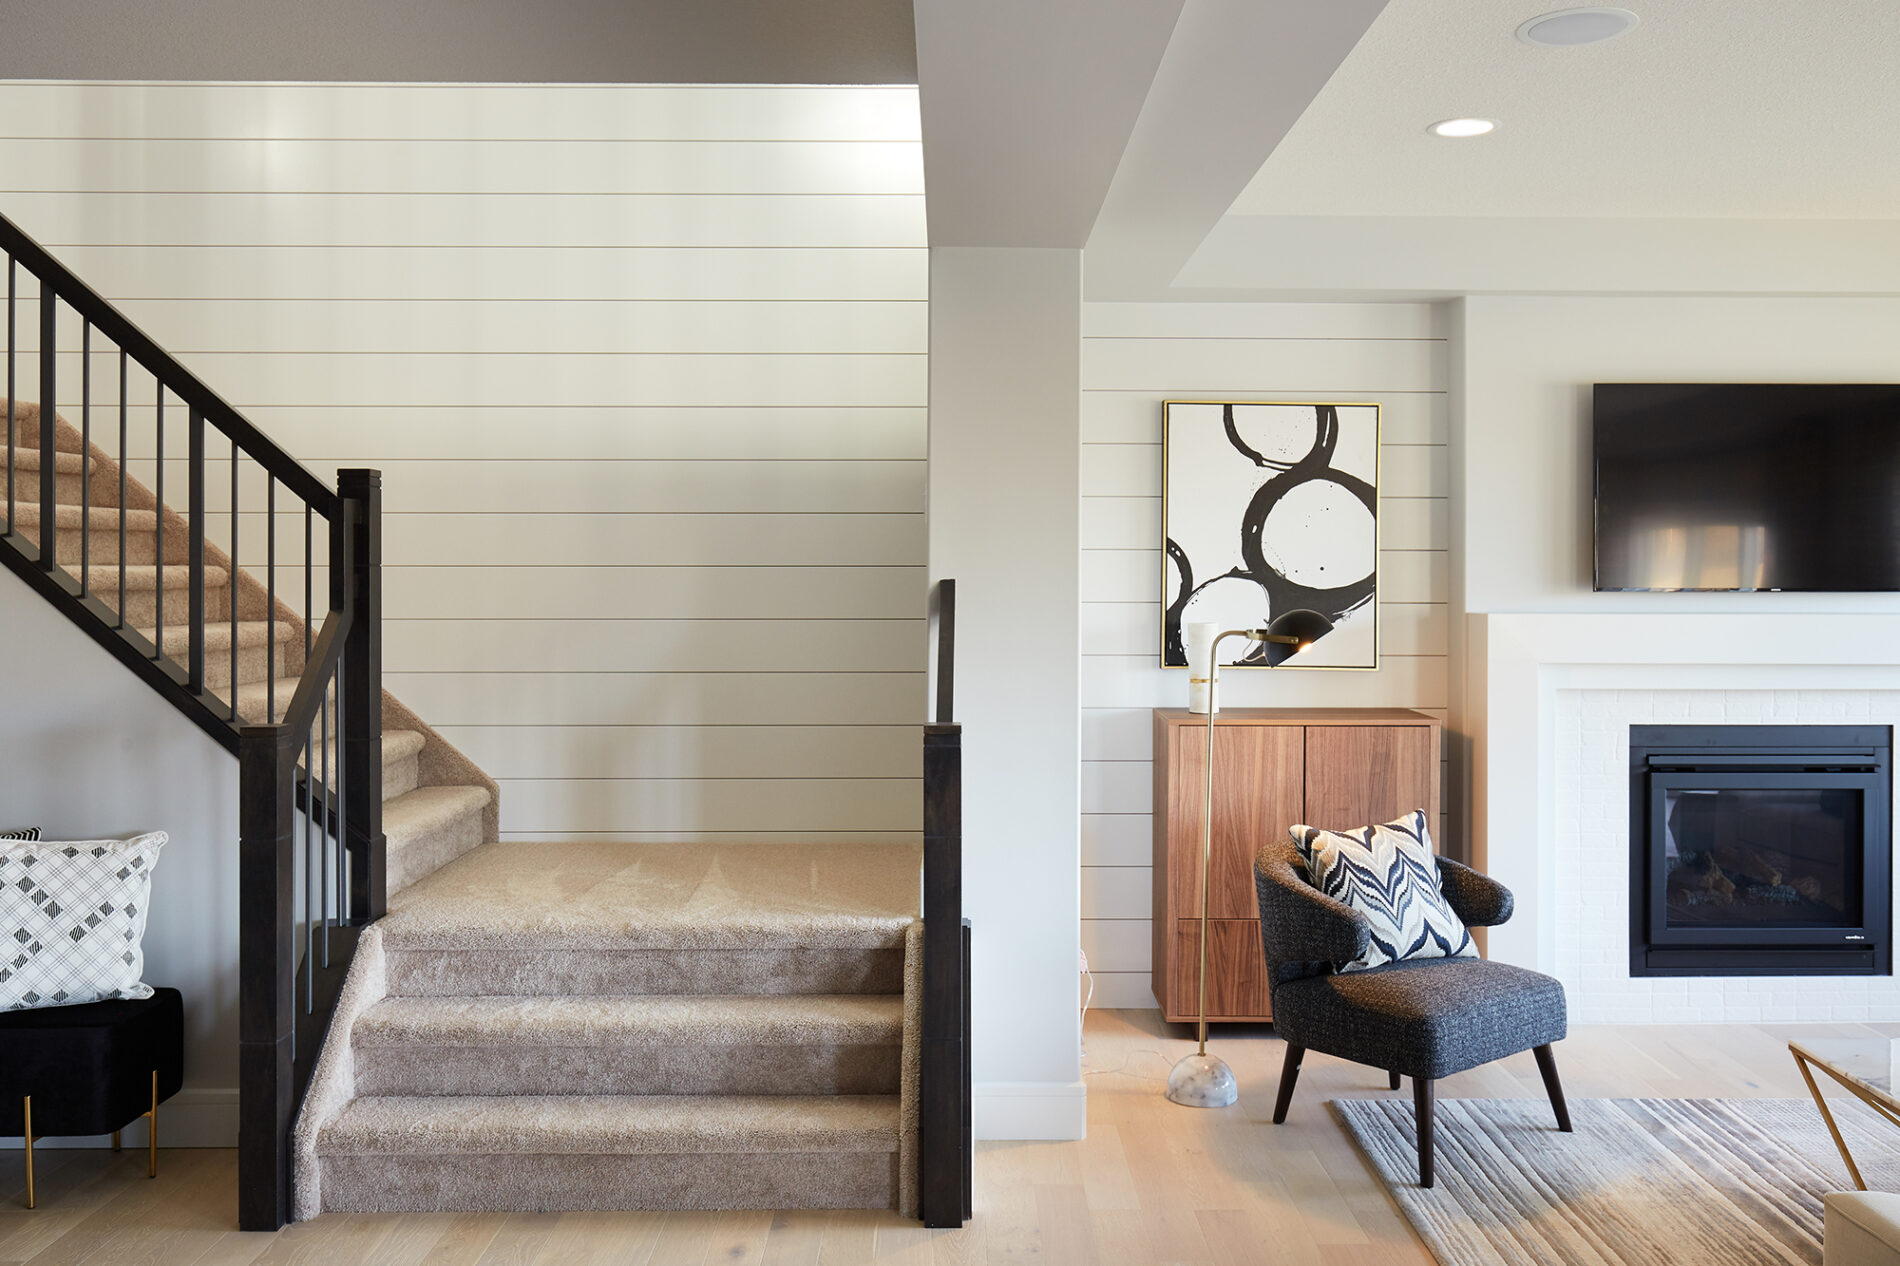 Stairwell wall and wall flanking the fireplace in the great room featuring sleek, white shiplap detail